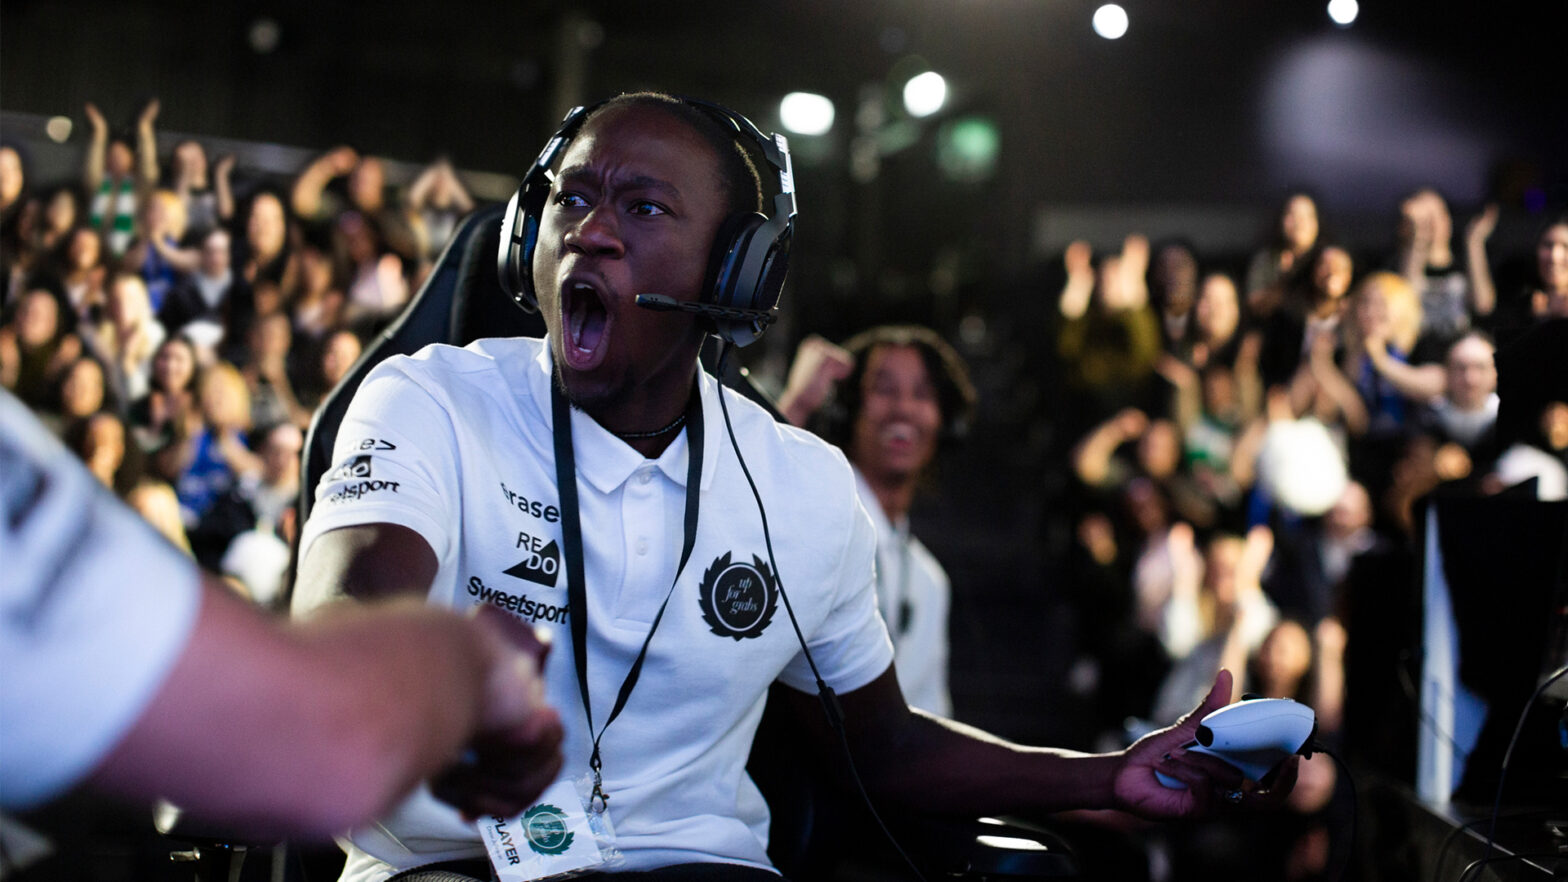 Howard University Call Of Duty Team, Cold Steel, Wins $80K At Esports Tournament